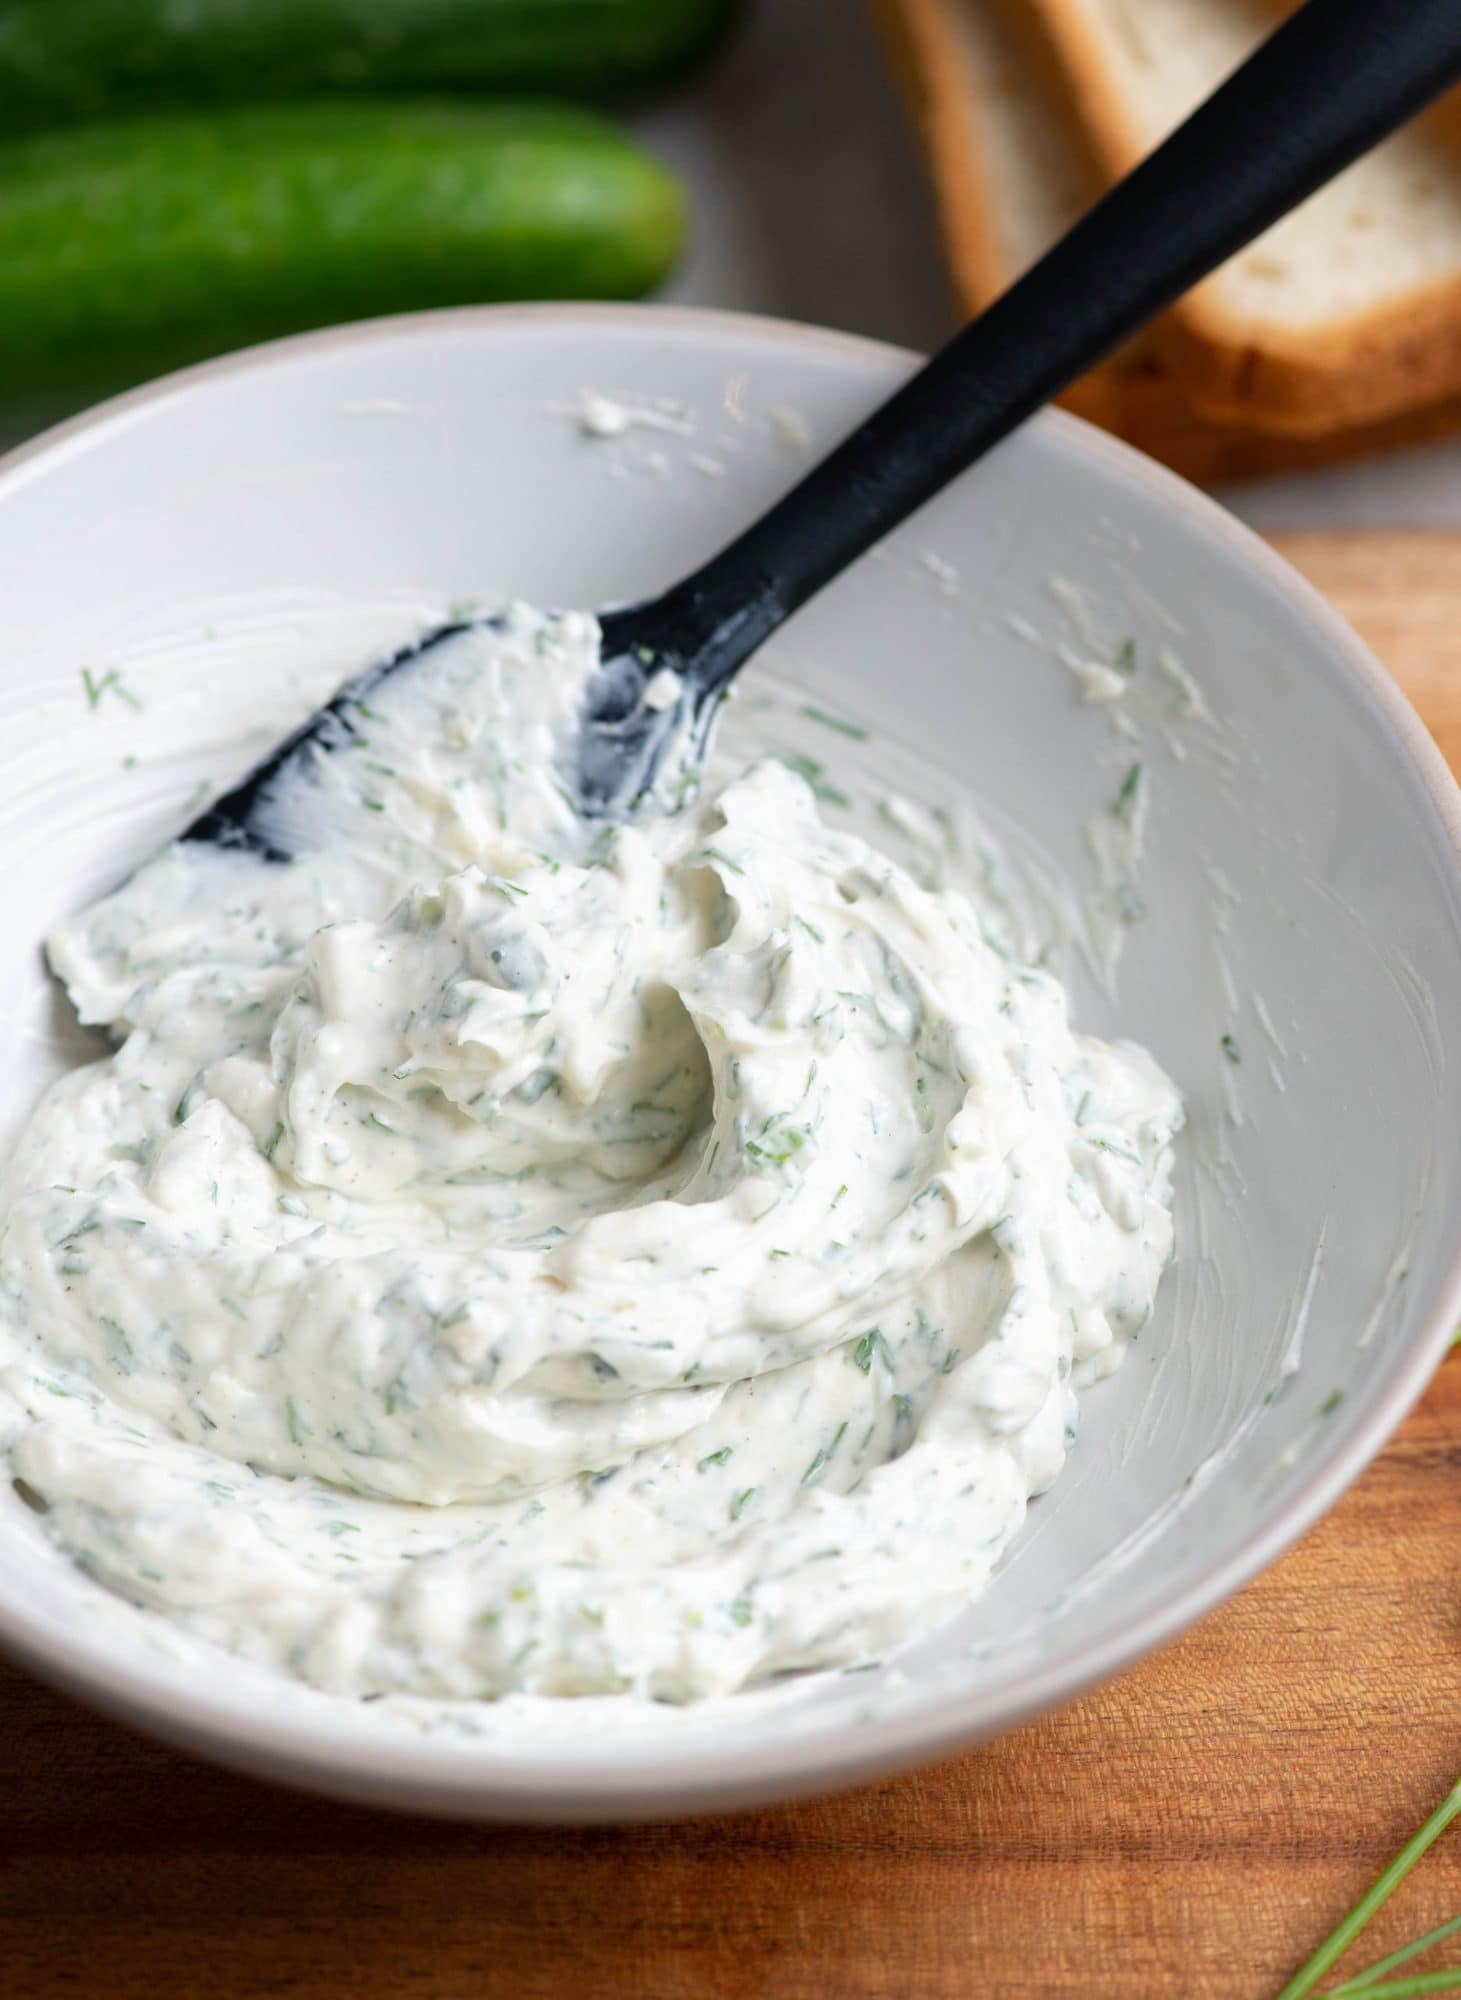 Herby cream cheese spread made in a small bowl and mixes with a black spatula.